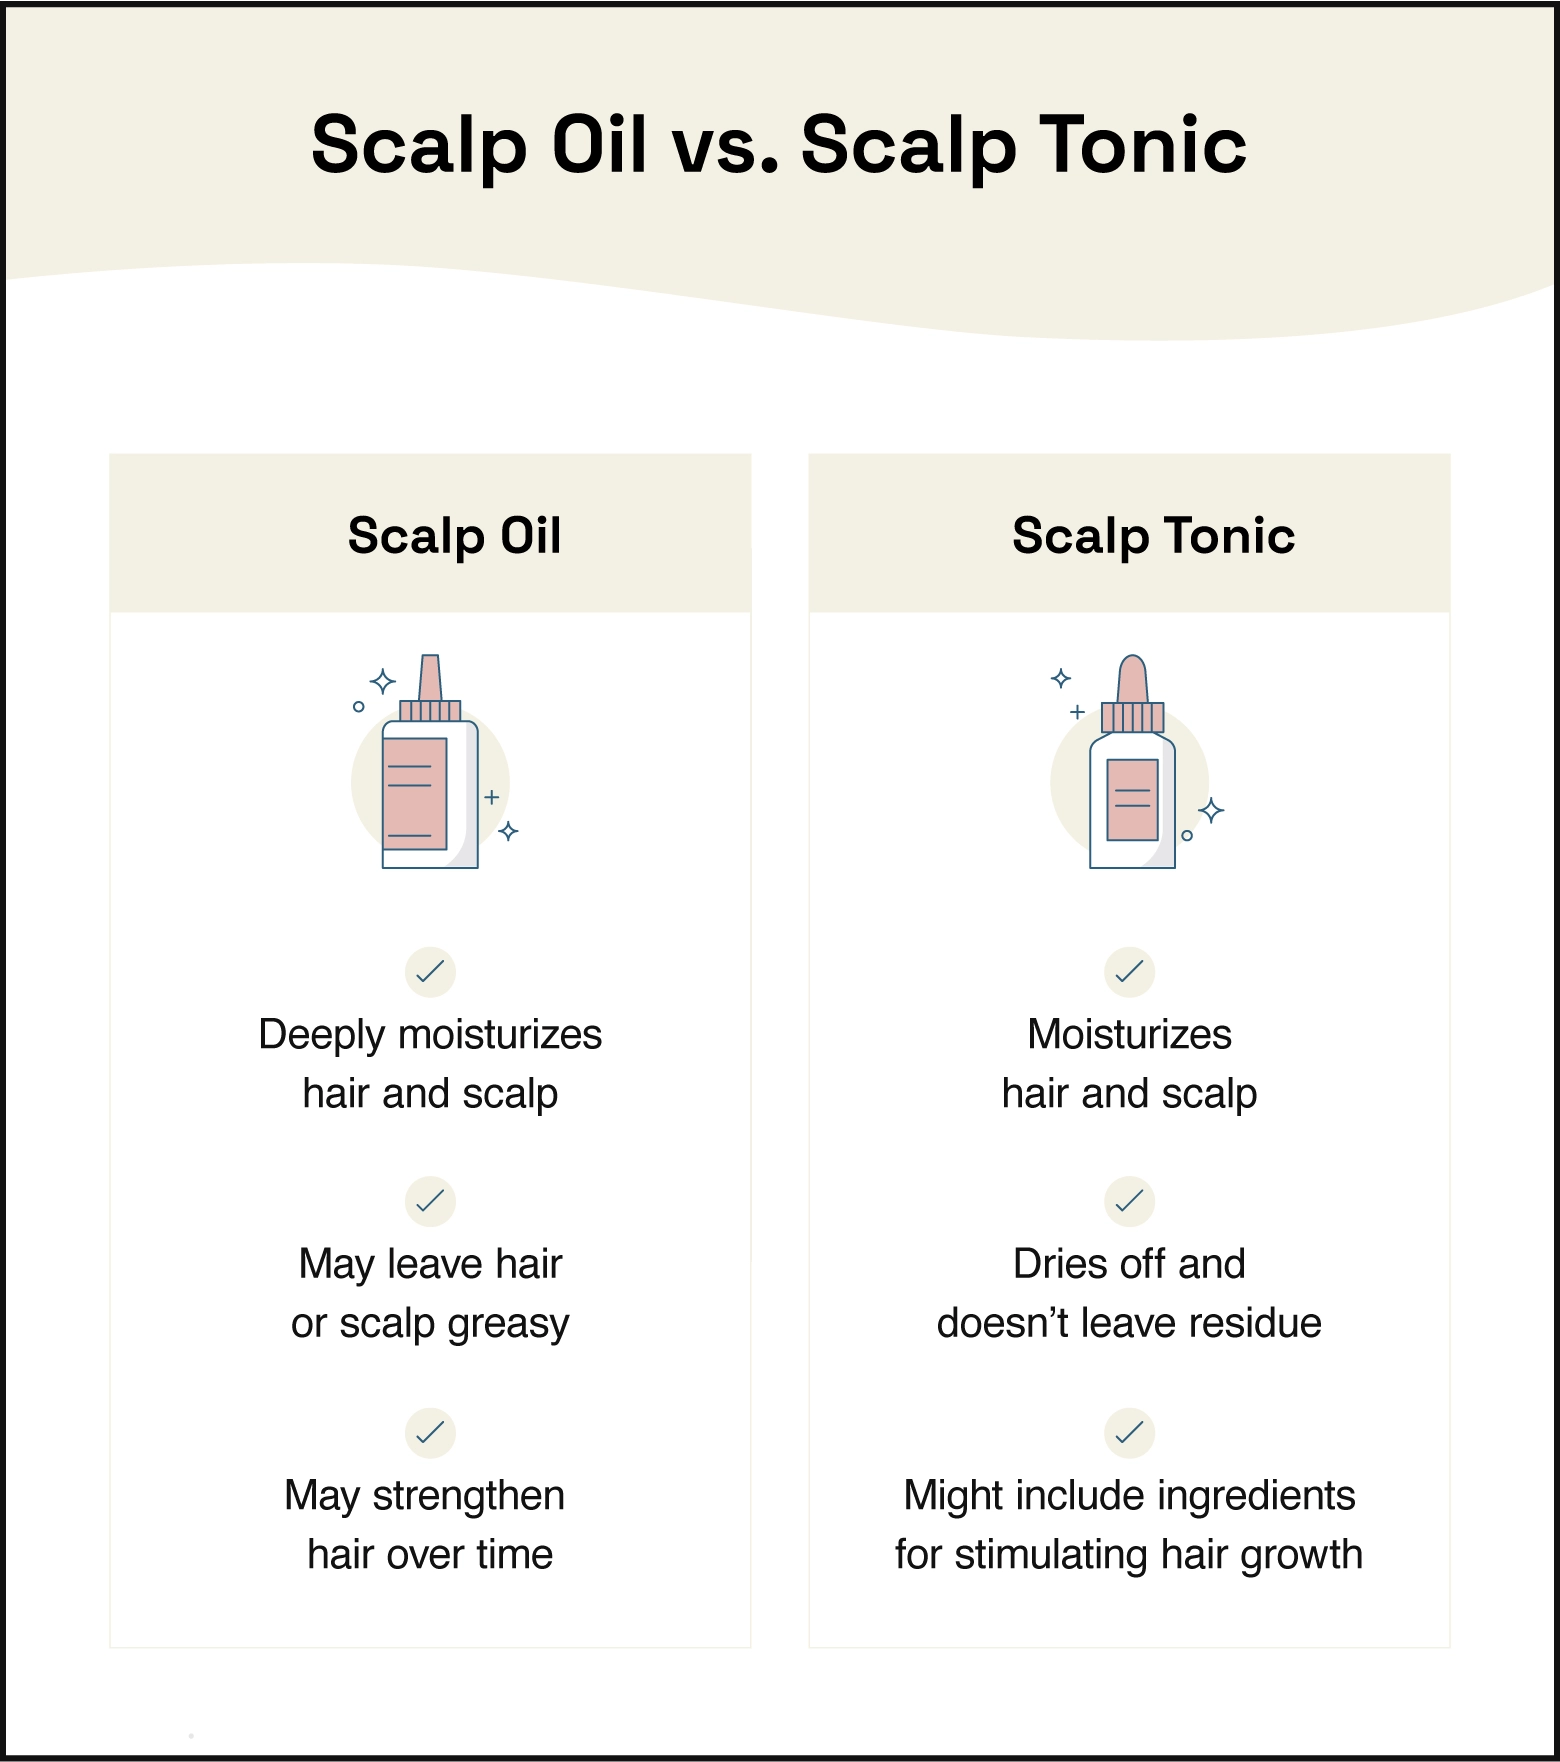 Image outlines differences between scalp oil and scalp tonic.